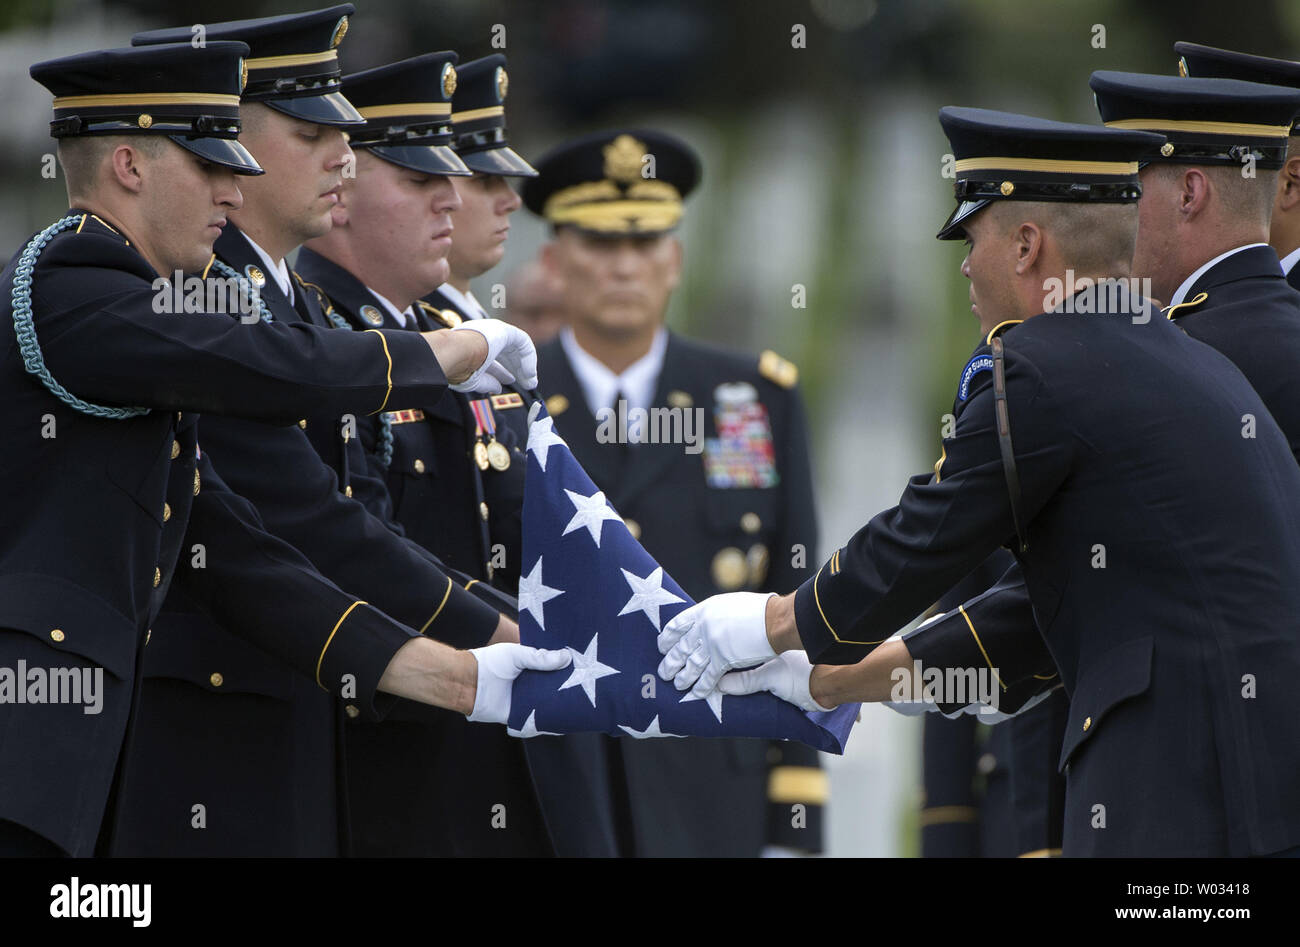 An Army Honor Guard prepares a flag to be presented to Susan Myers, the widow of Army Maj. Gen. Harold J. Greene, during Greene's graveside service at Arlington National Cemetery on August 14, 2014 in Arlington, Virginia. Greene was shot and killed by a uniformed Afghan soldier while was visiting a military academy in Kabul. UPI/Kevin Dietsch Stock Photo